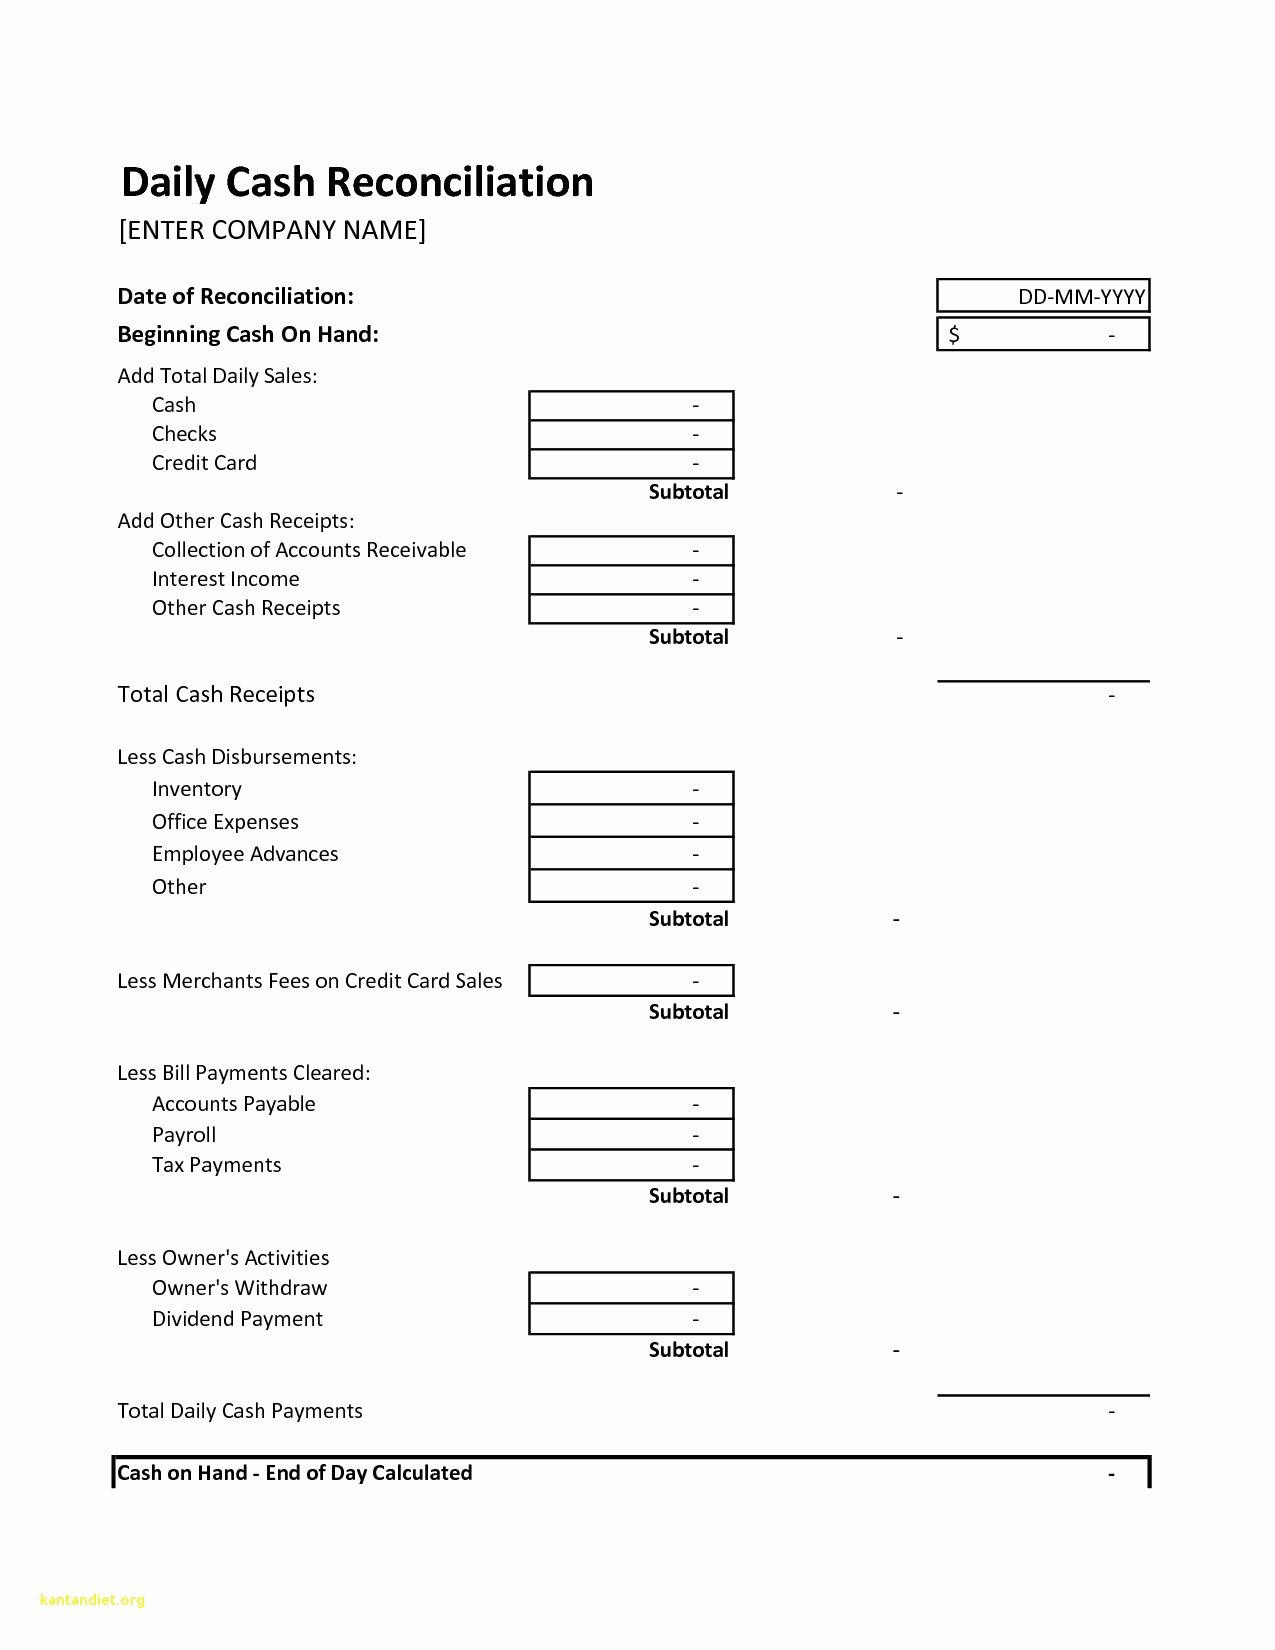 Daily Cash Sheet Template Excel Beautiful Daily Cash Sheet Template Excel